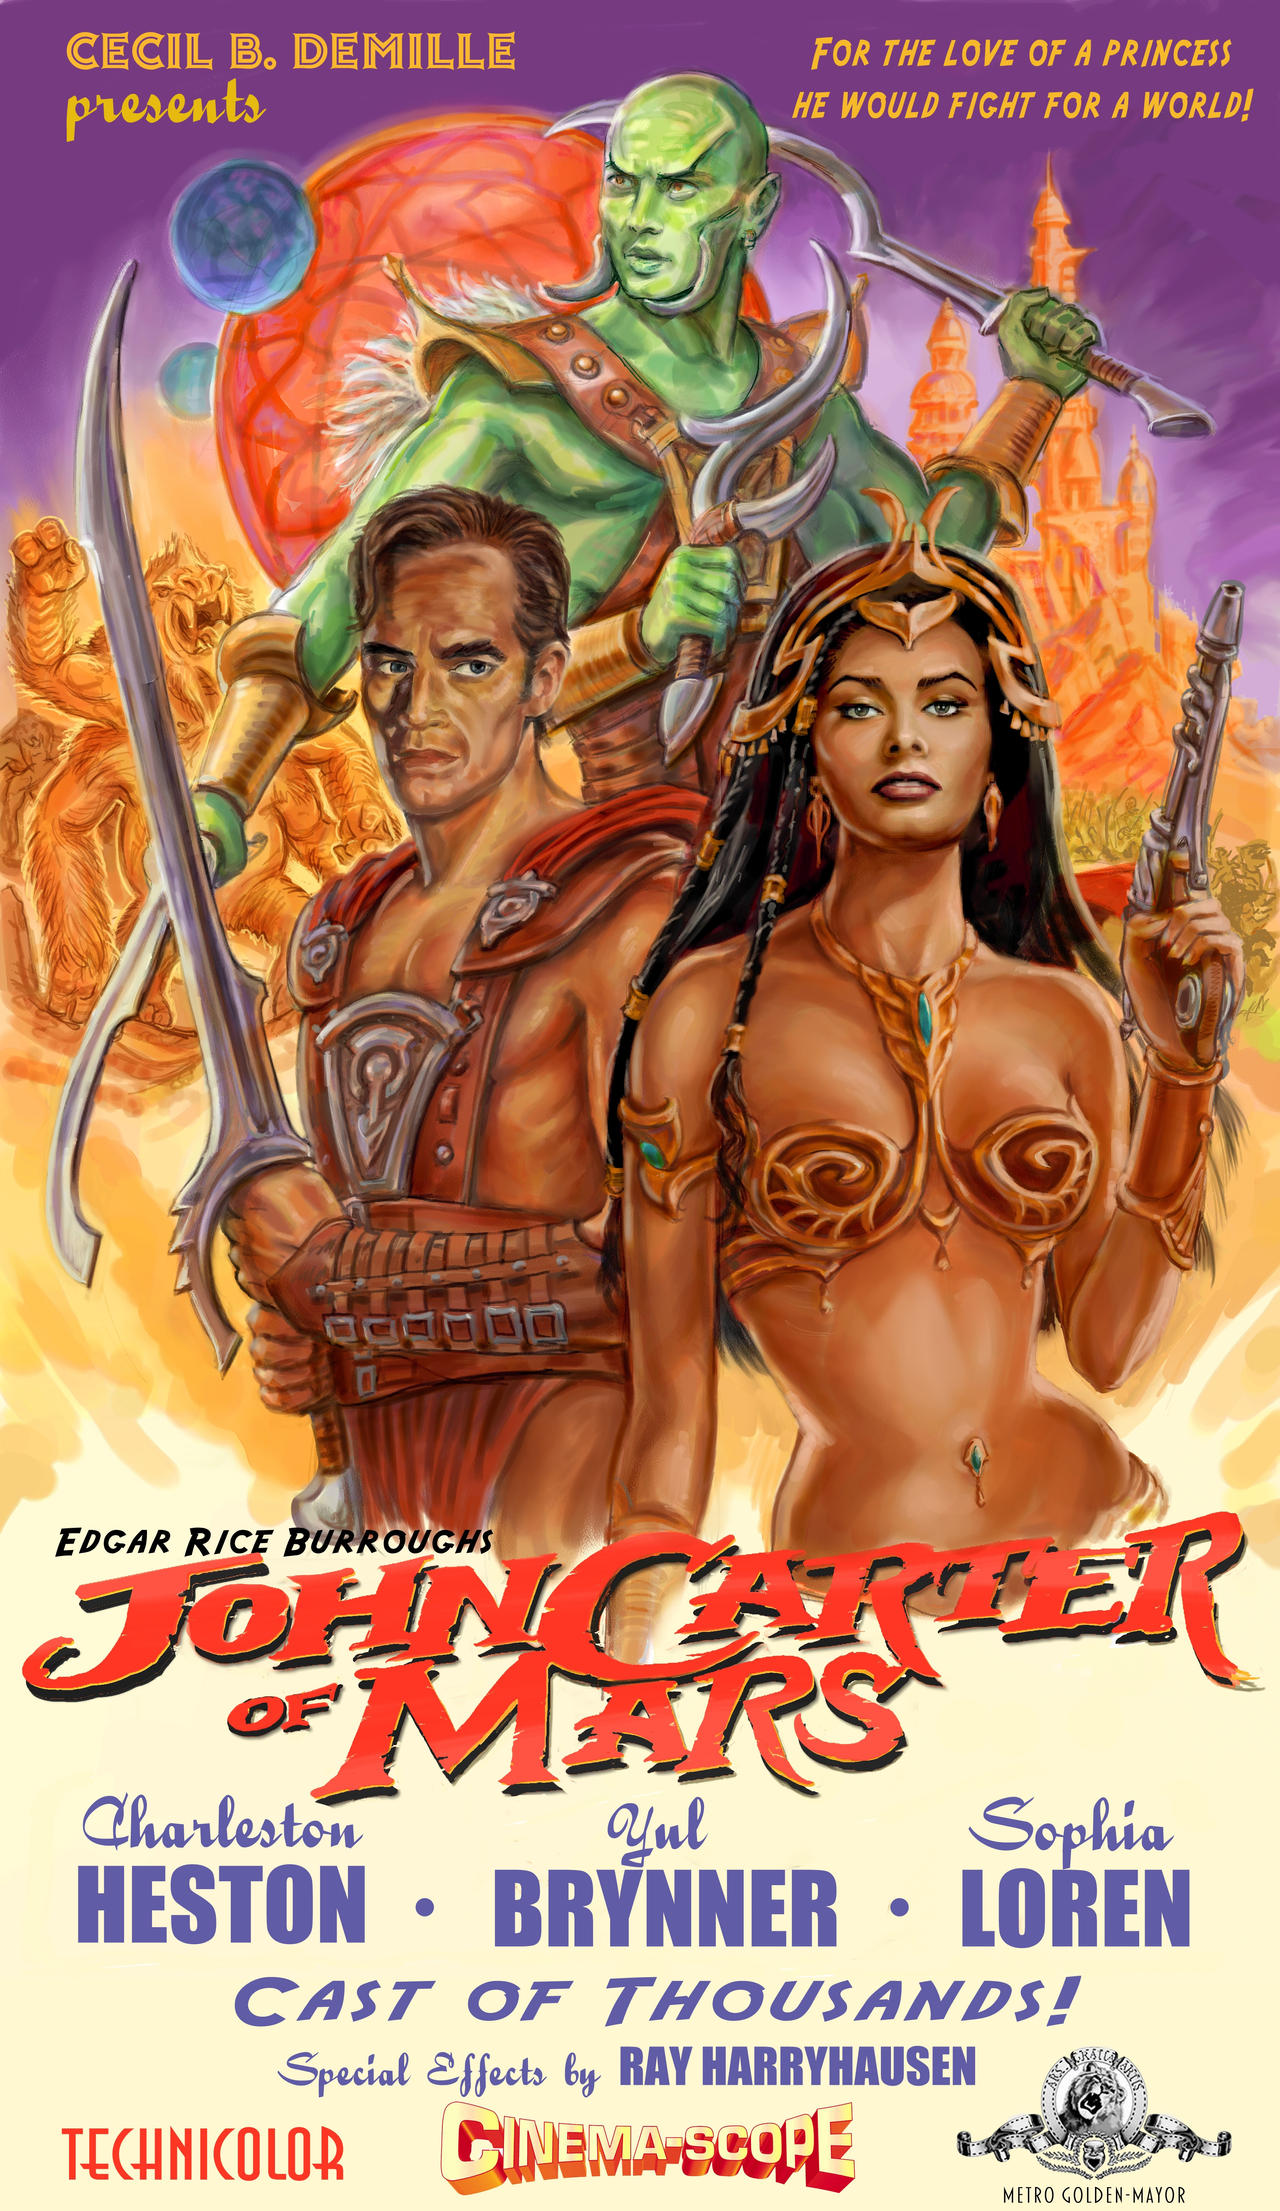 john_carter_of_mars_by_cecil_demille_poster_by_scaleyscribe-d5x401m.jpg